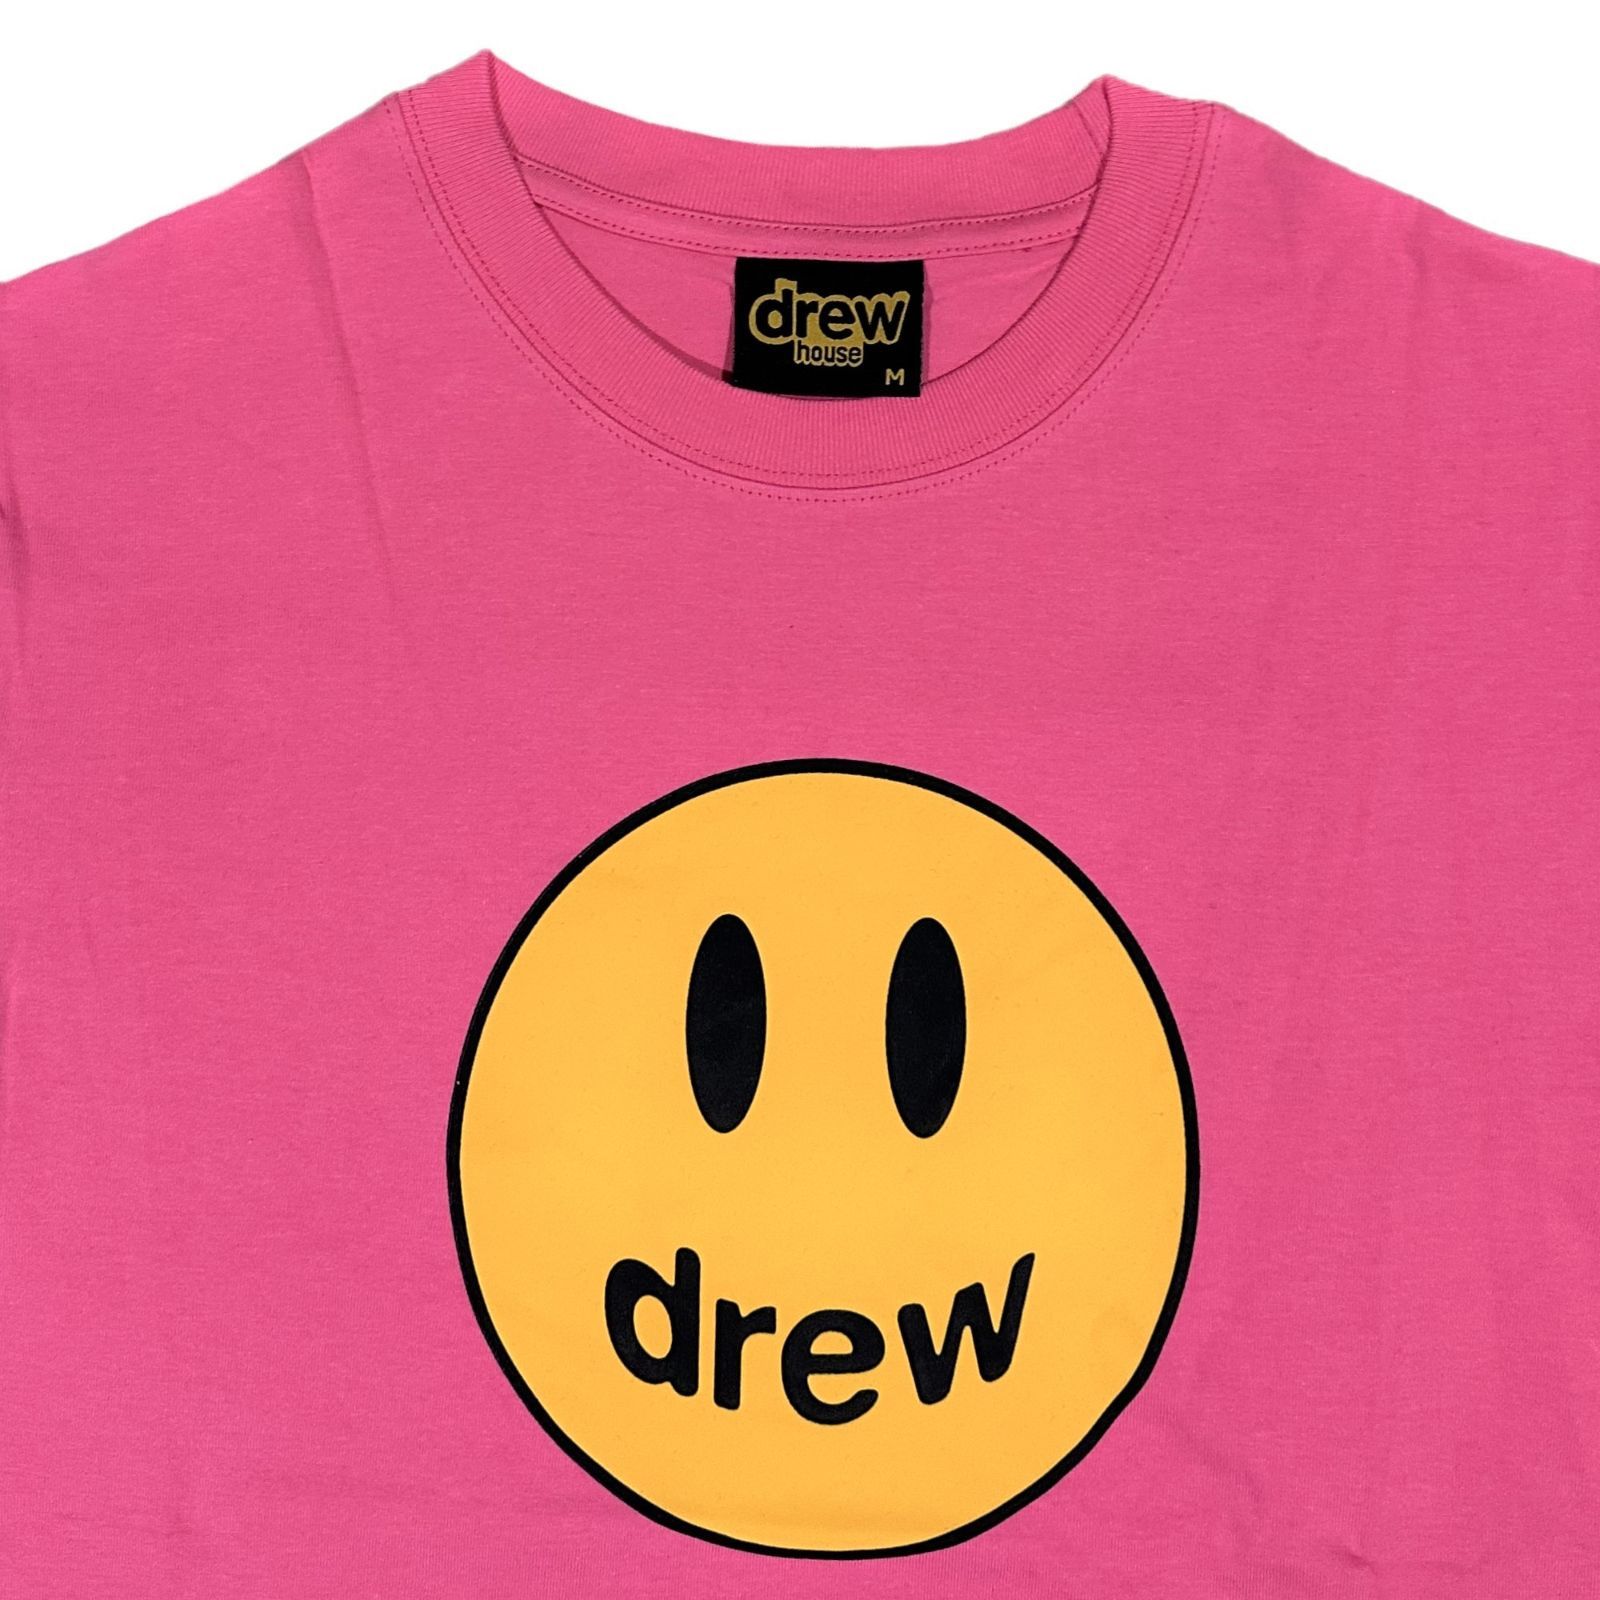 DREW HOUSE マスコットプリント 半袖 Tシャツ ピンク - Real Time 24